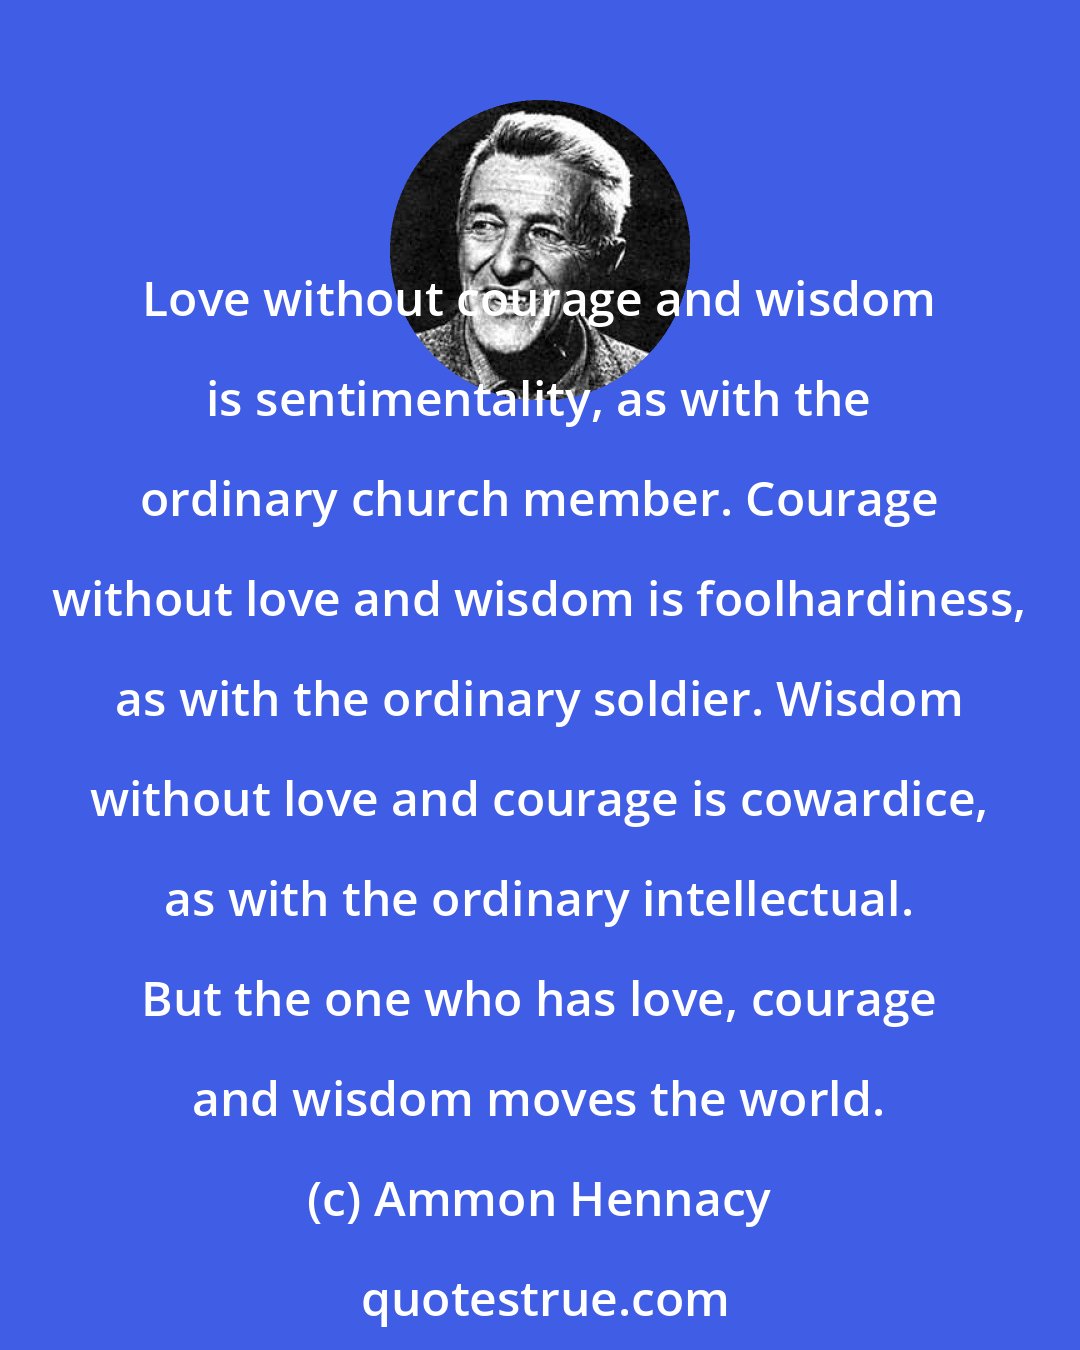 Ammon Hennacy: Love without courage and wisdom is sentimentality, as with the ordinary church member. Courage without love and wisdom is foolhardiness, as with the ordinary soldier. Wisdom without love and courage is cowardice, as with the ordinary intellectual. But the one who has love, courage and wisdom moves the world.